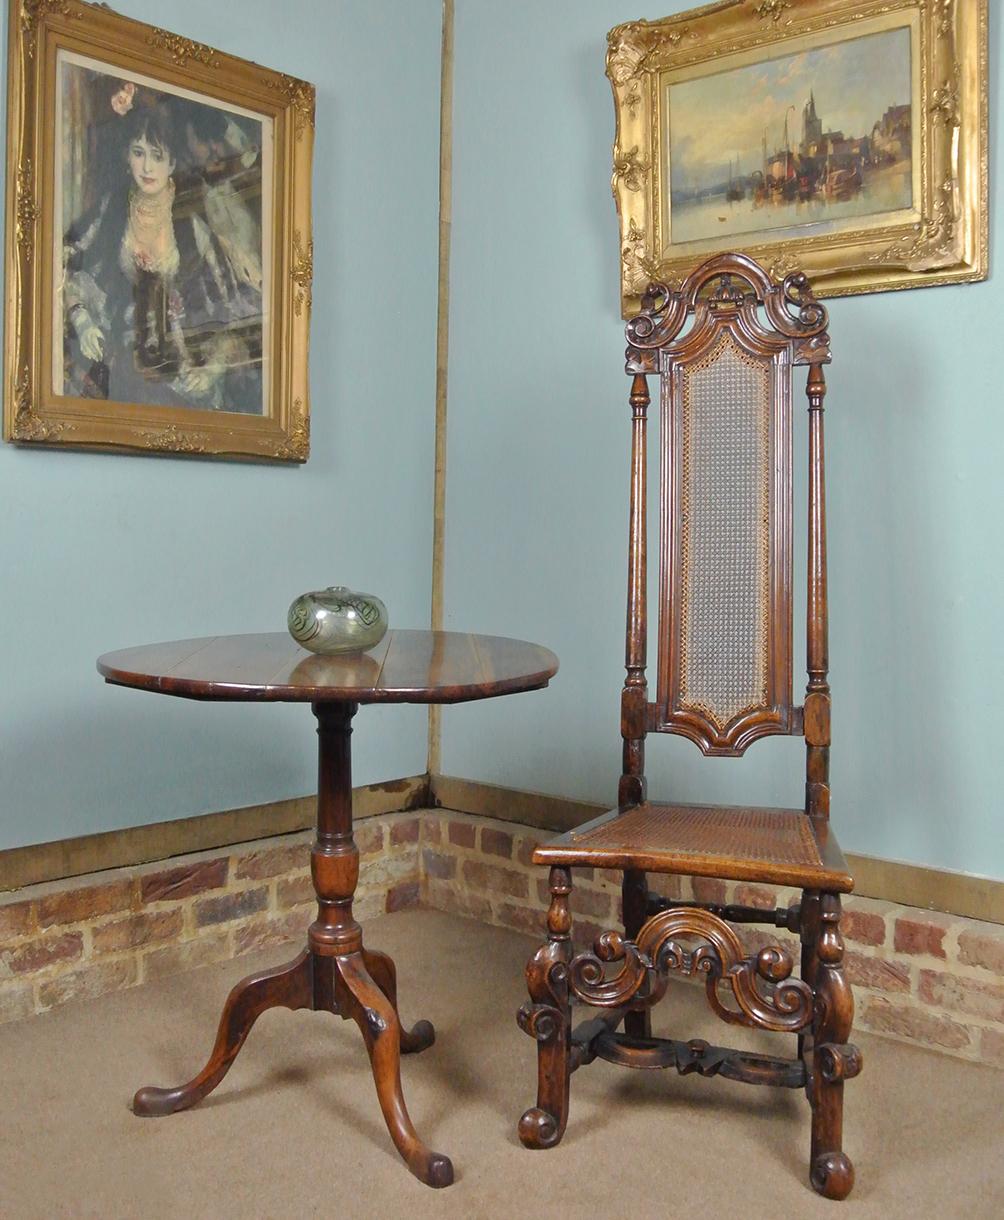 With an excellent colour and very well developed patination, this beautiful walnut chair was made in the late 17th century by a provincial English craftsman. It is of solid walnut and carved with great exuberance, expression and fluidity. The softly